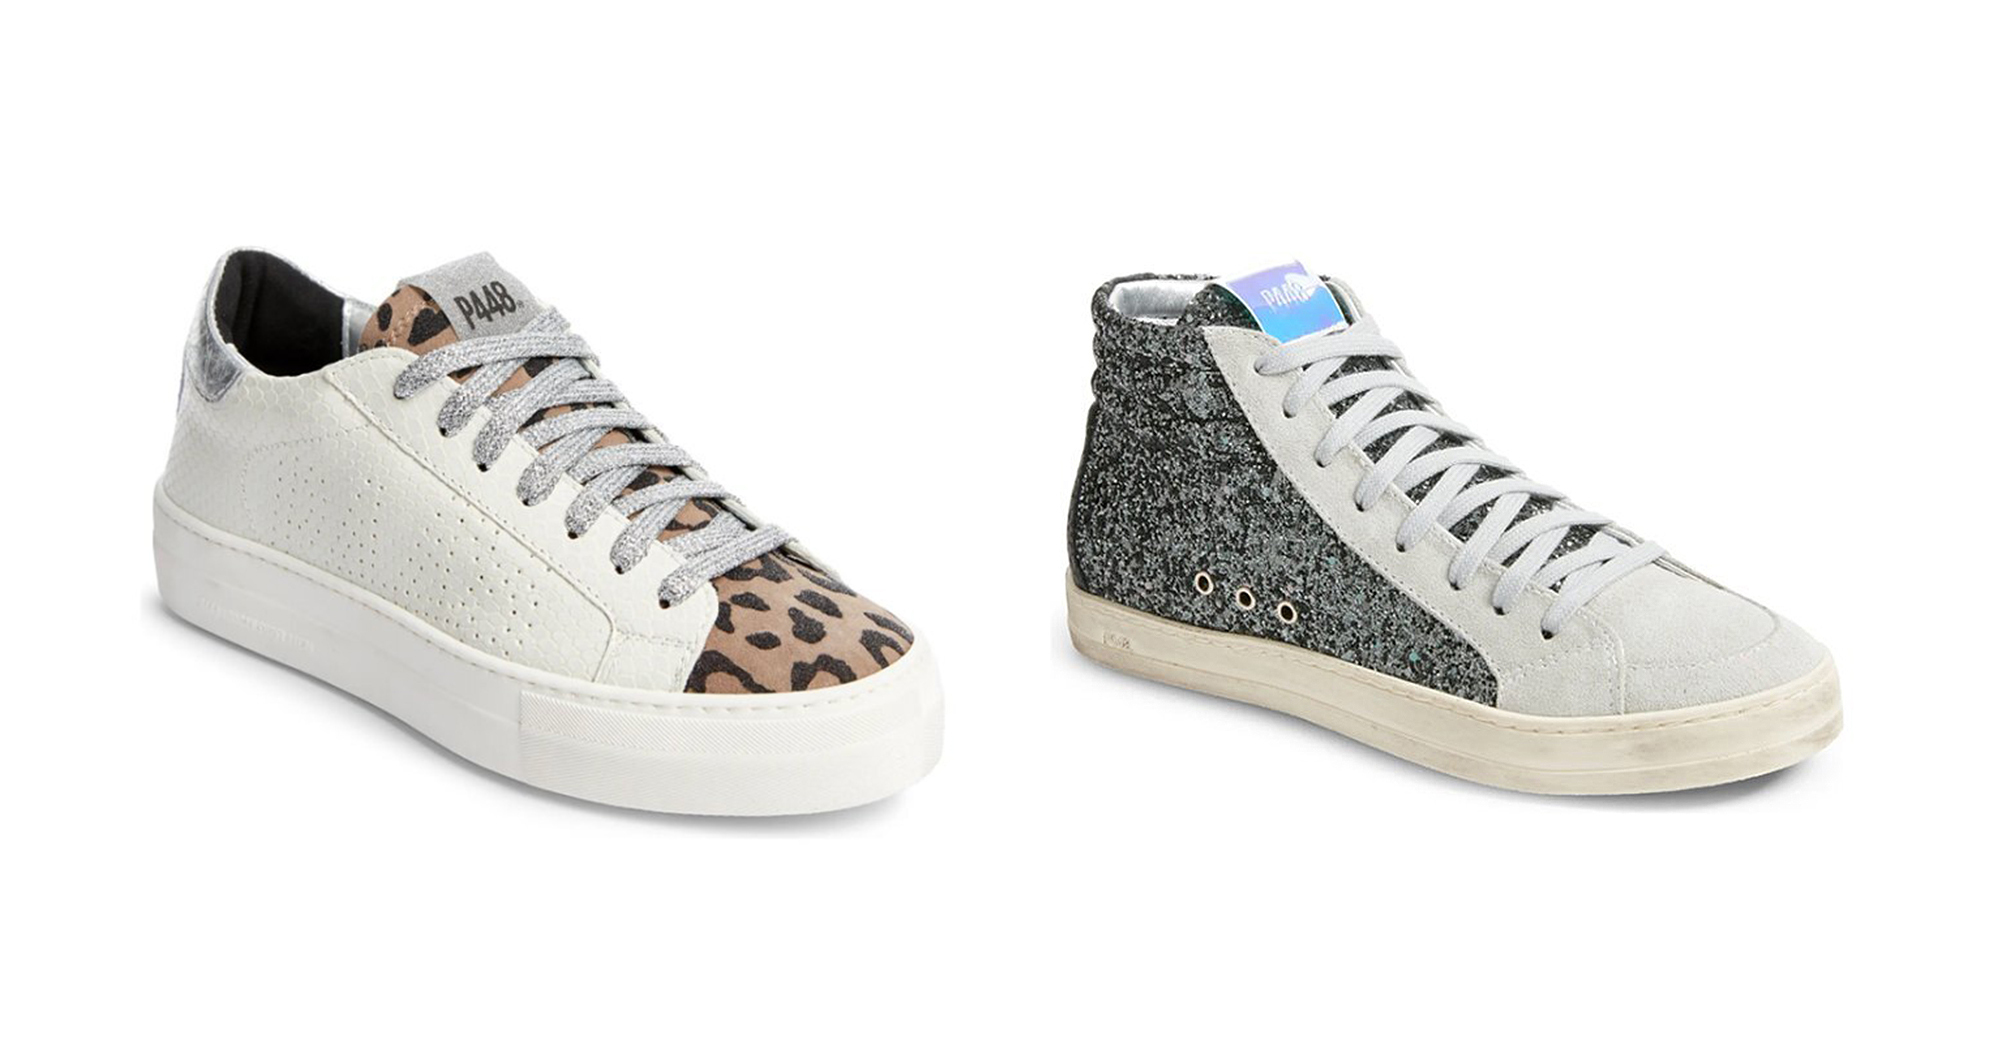 The article: Introducing the ASTROLOUBI: Christian Louboutin's new must-have  sneaker